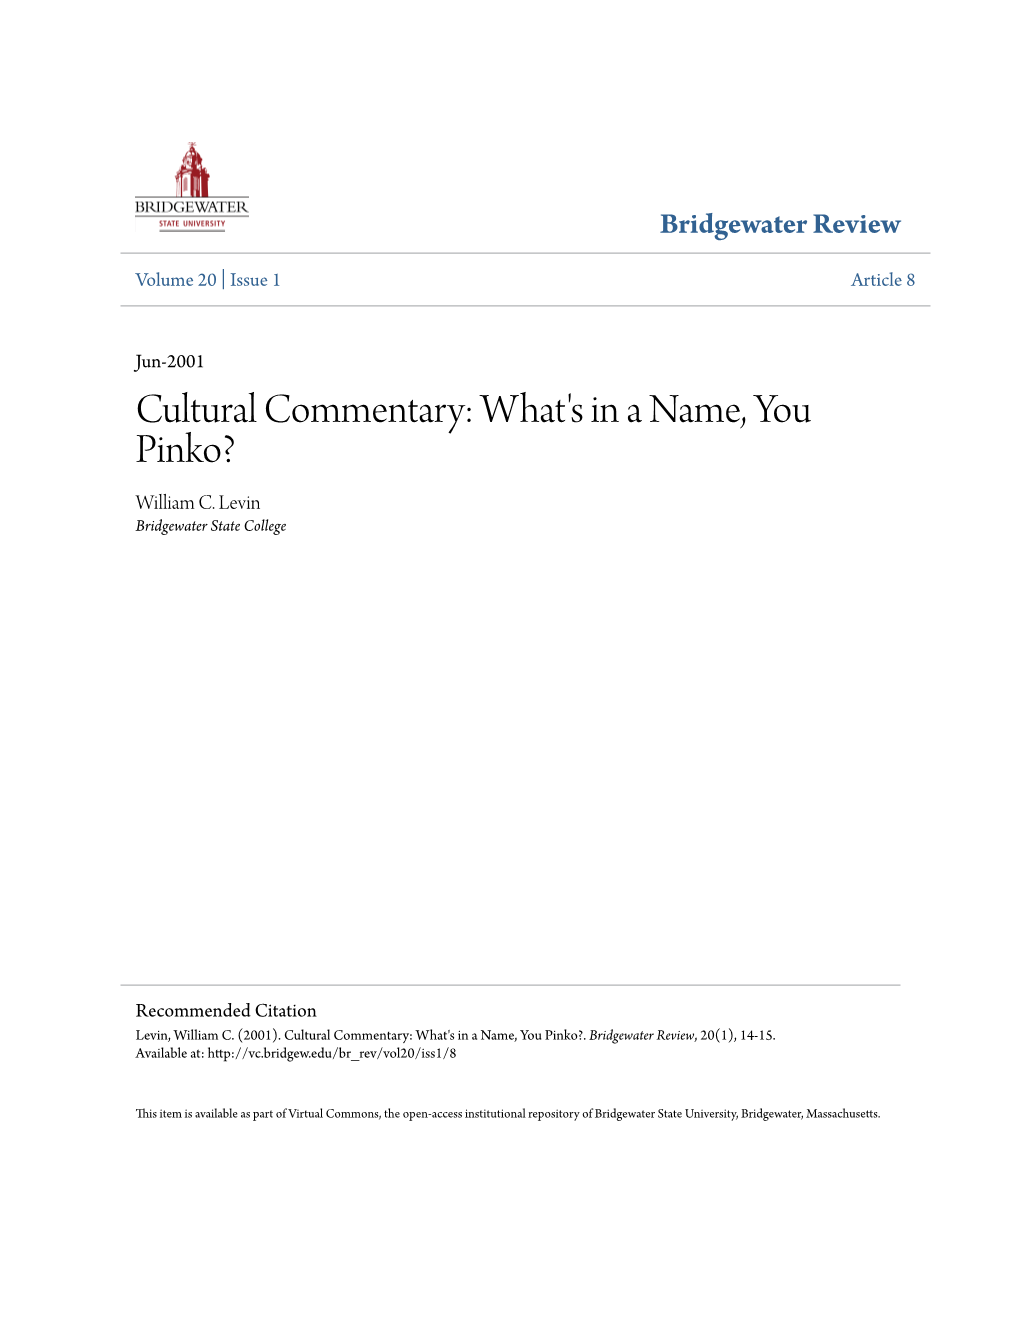 Cultural Commentary: What's in a Name, You Pinko? William C